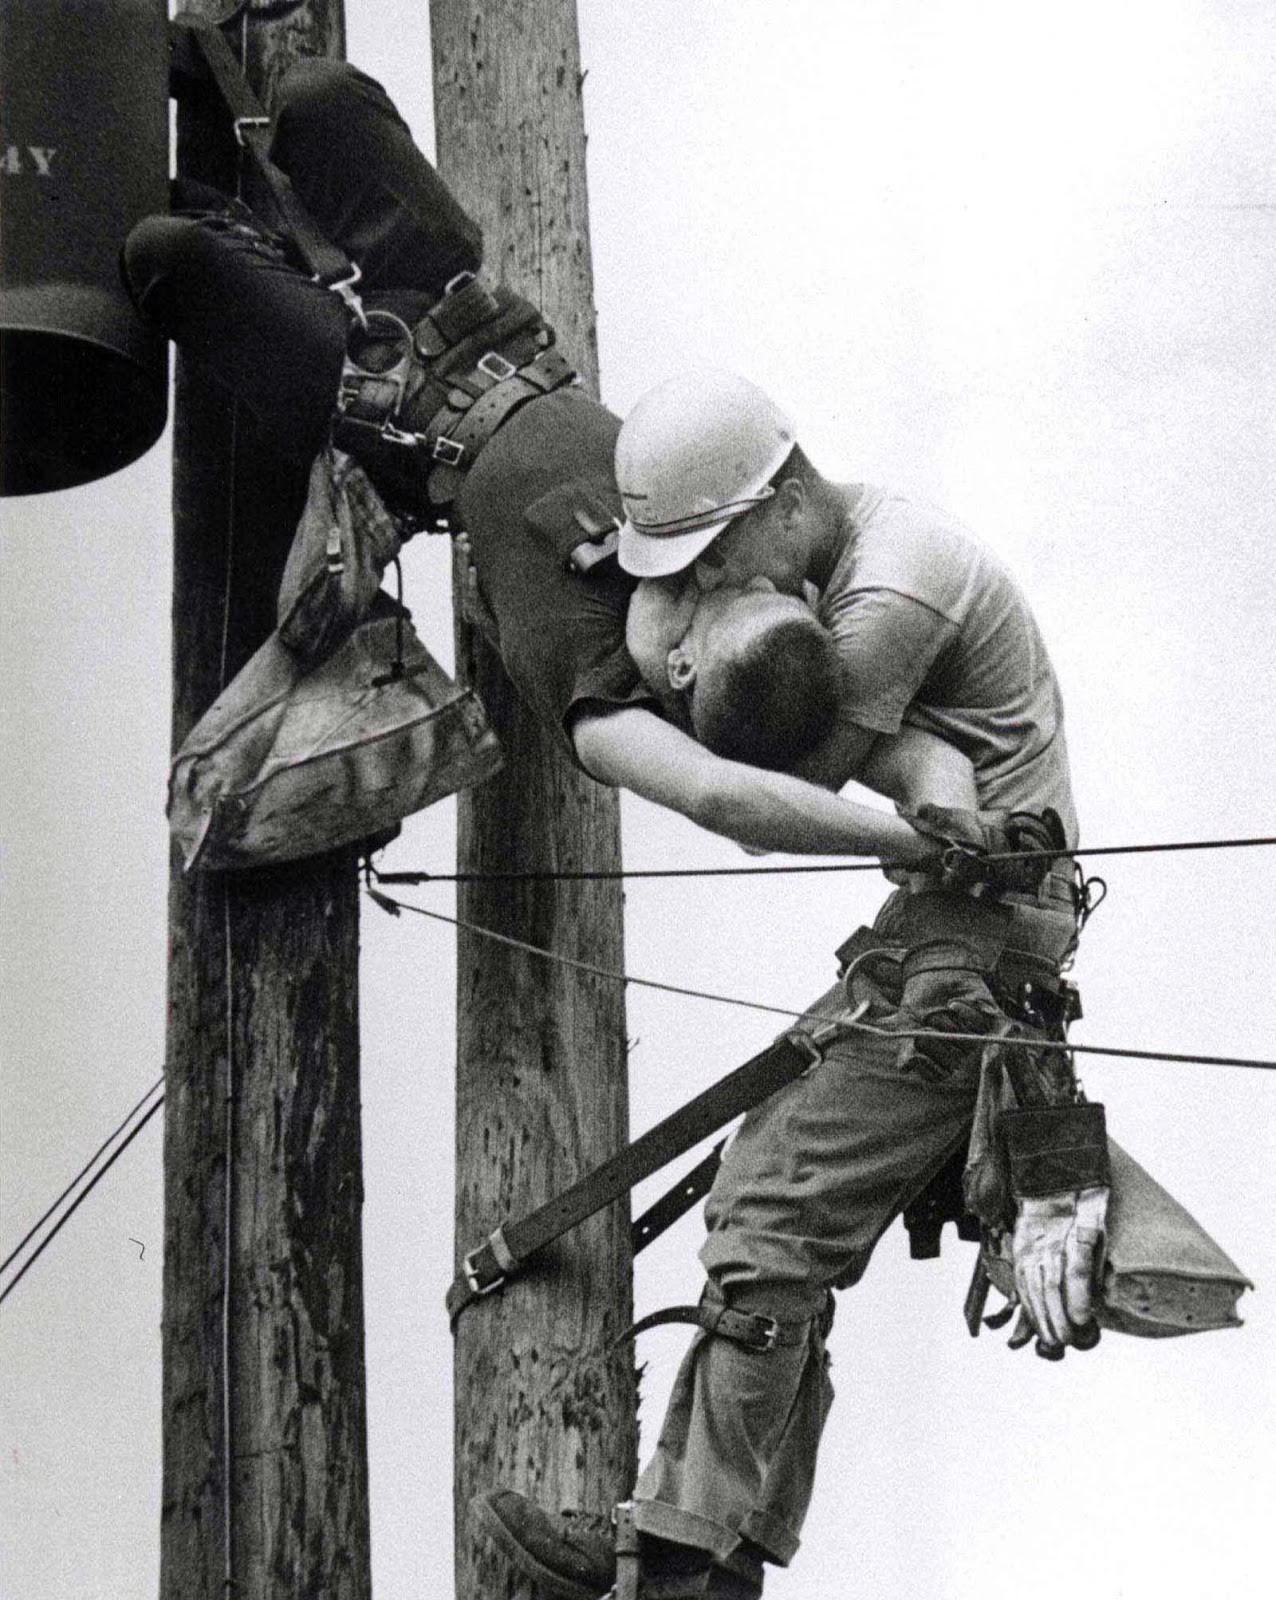 “The Kiss of Life” The incredible story behind the iconic photo